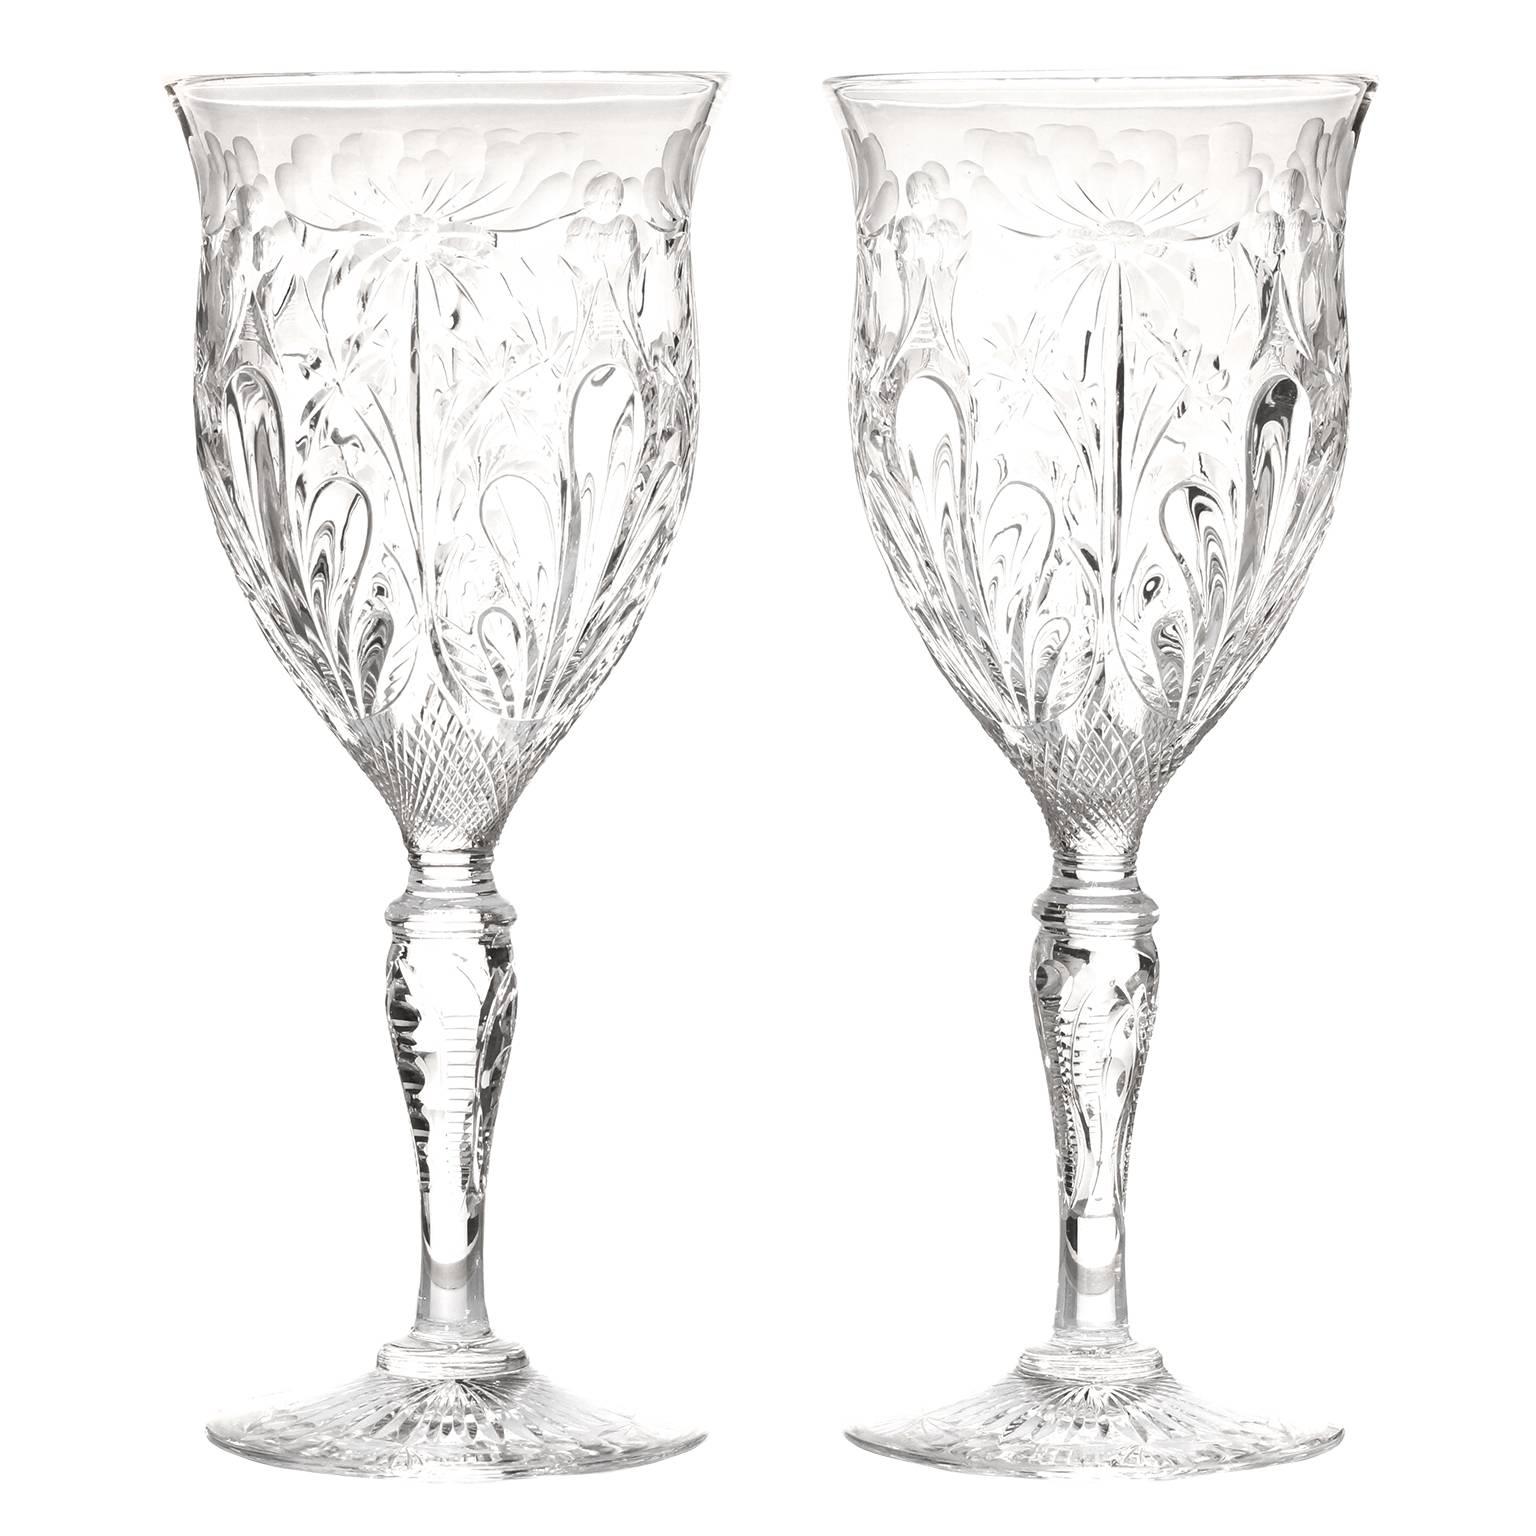 32 Exceptional Stevens & Williams Water Goblets